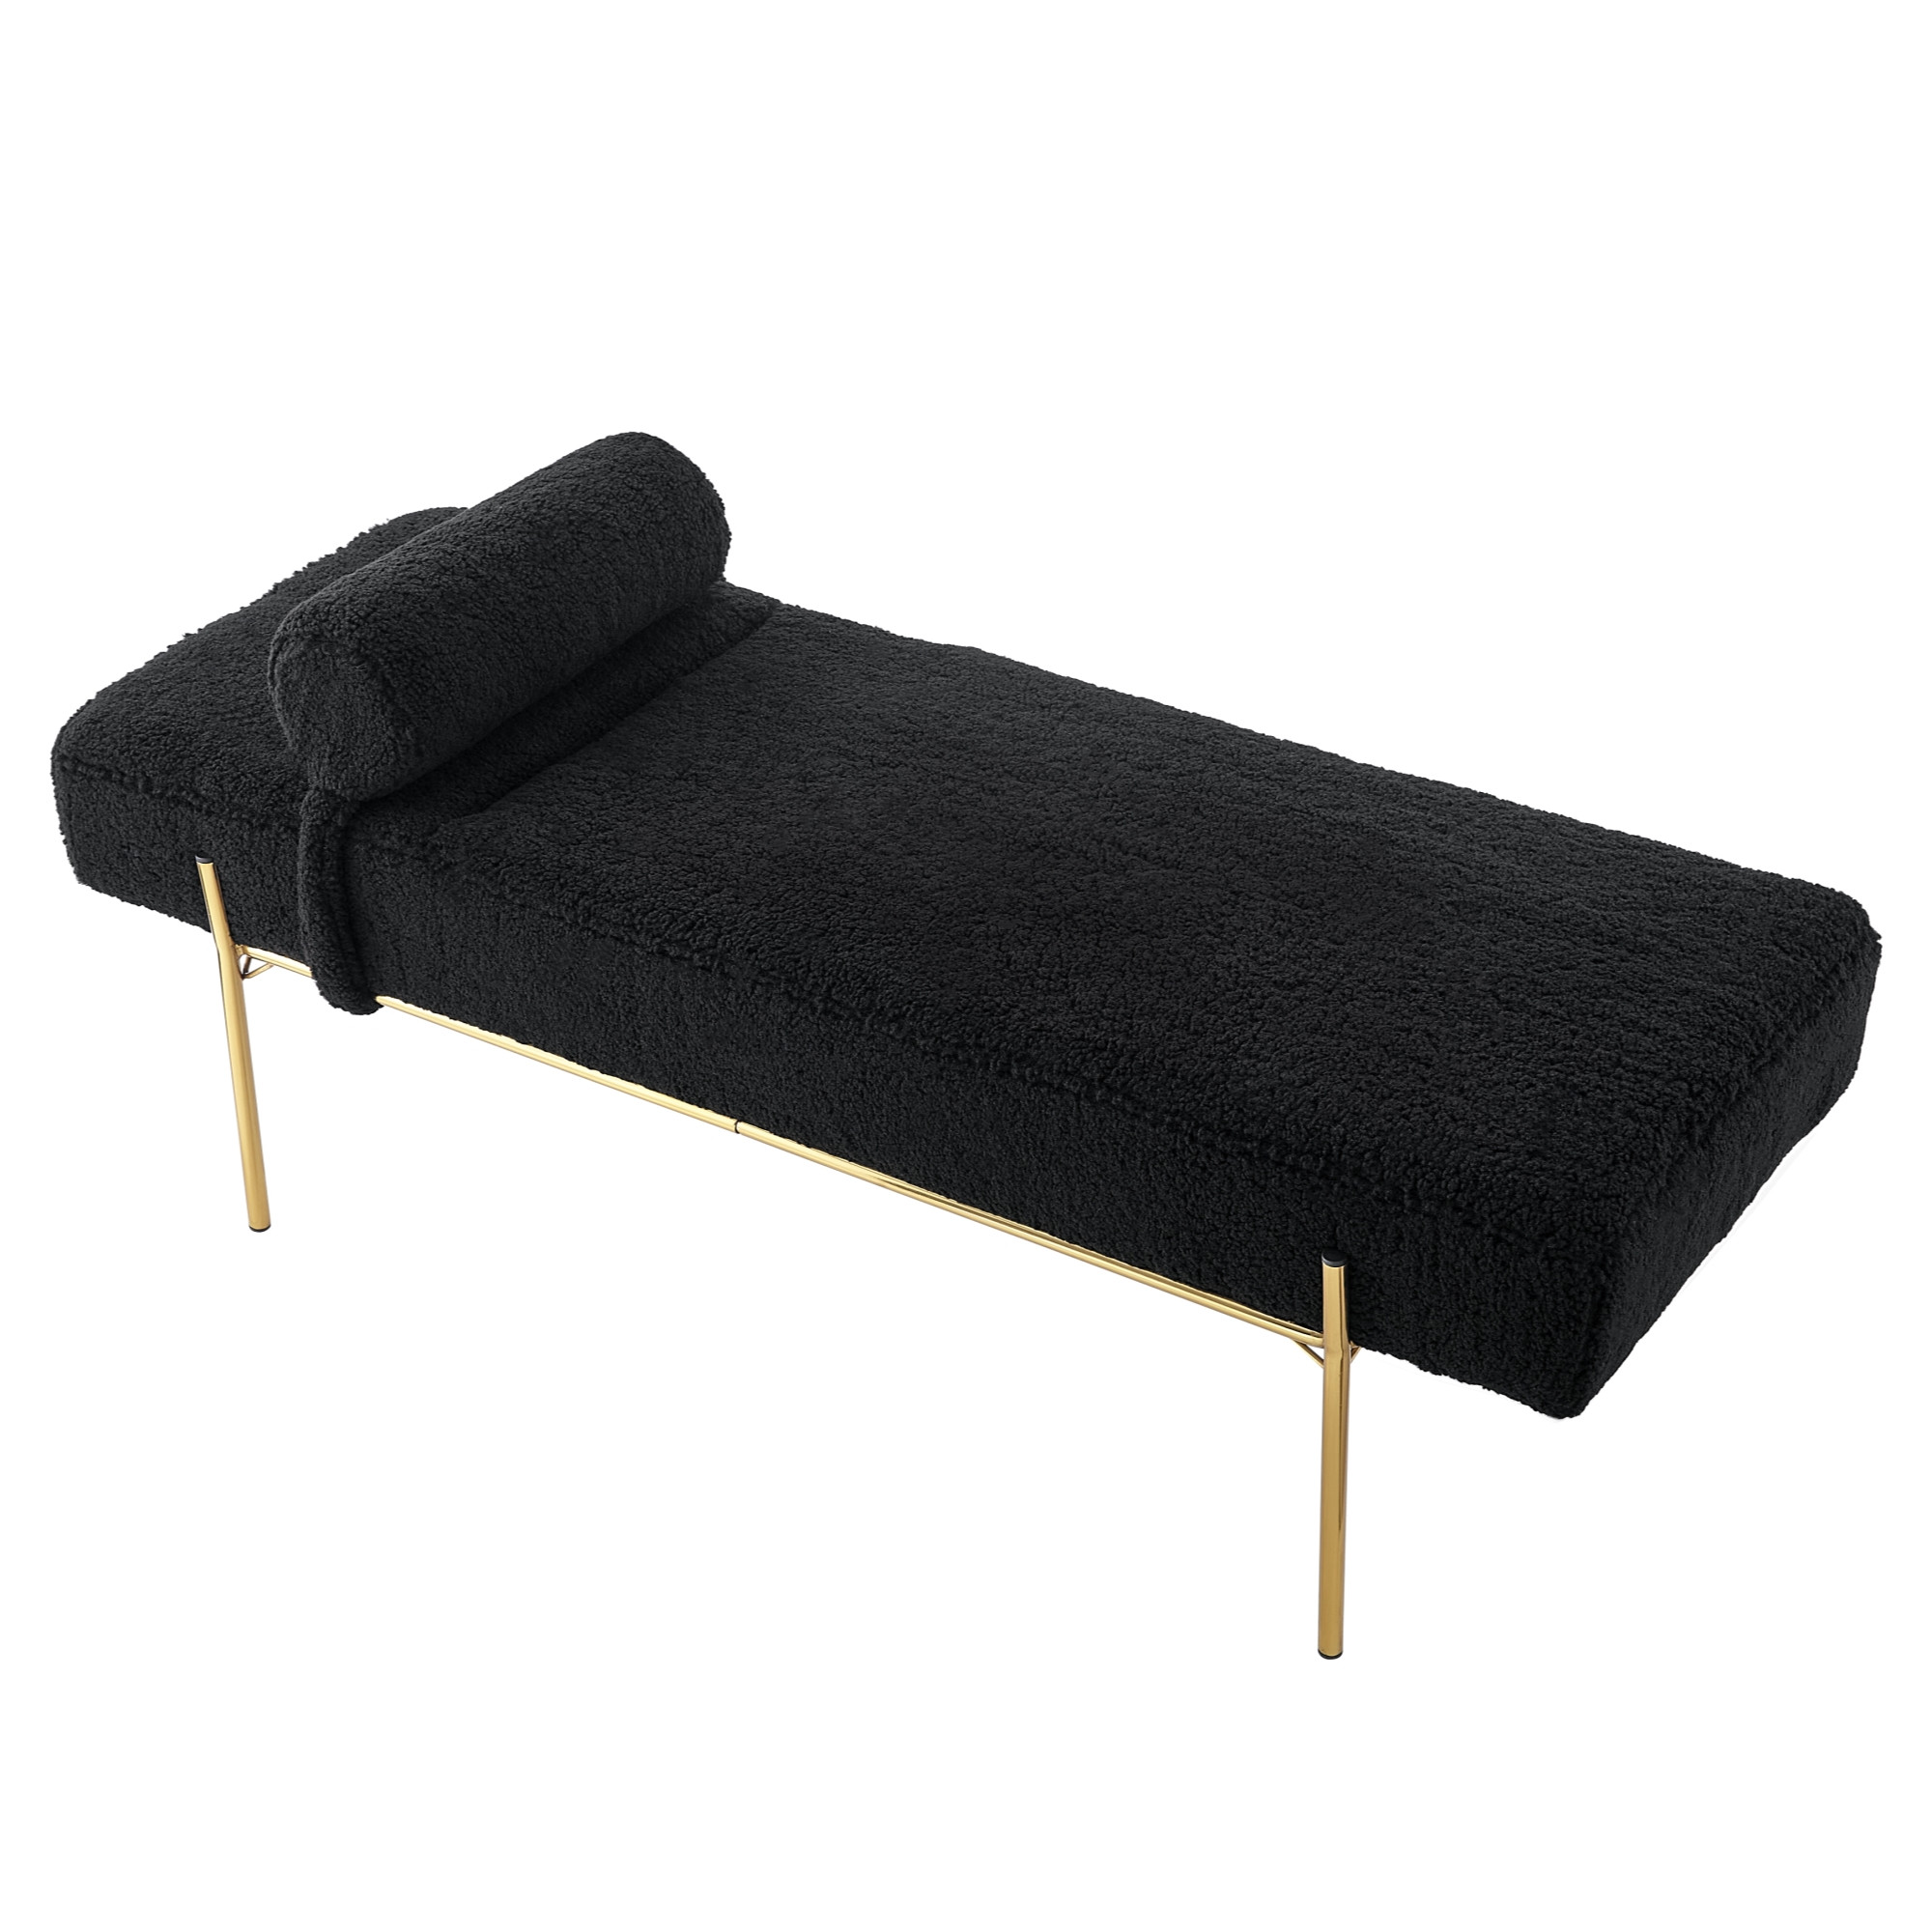 56" Black And Gold Upholstered Sherpa Bench-490936-1